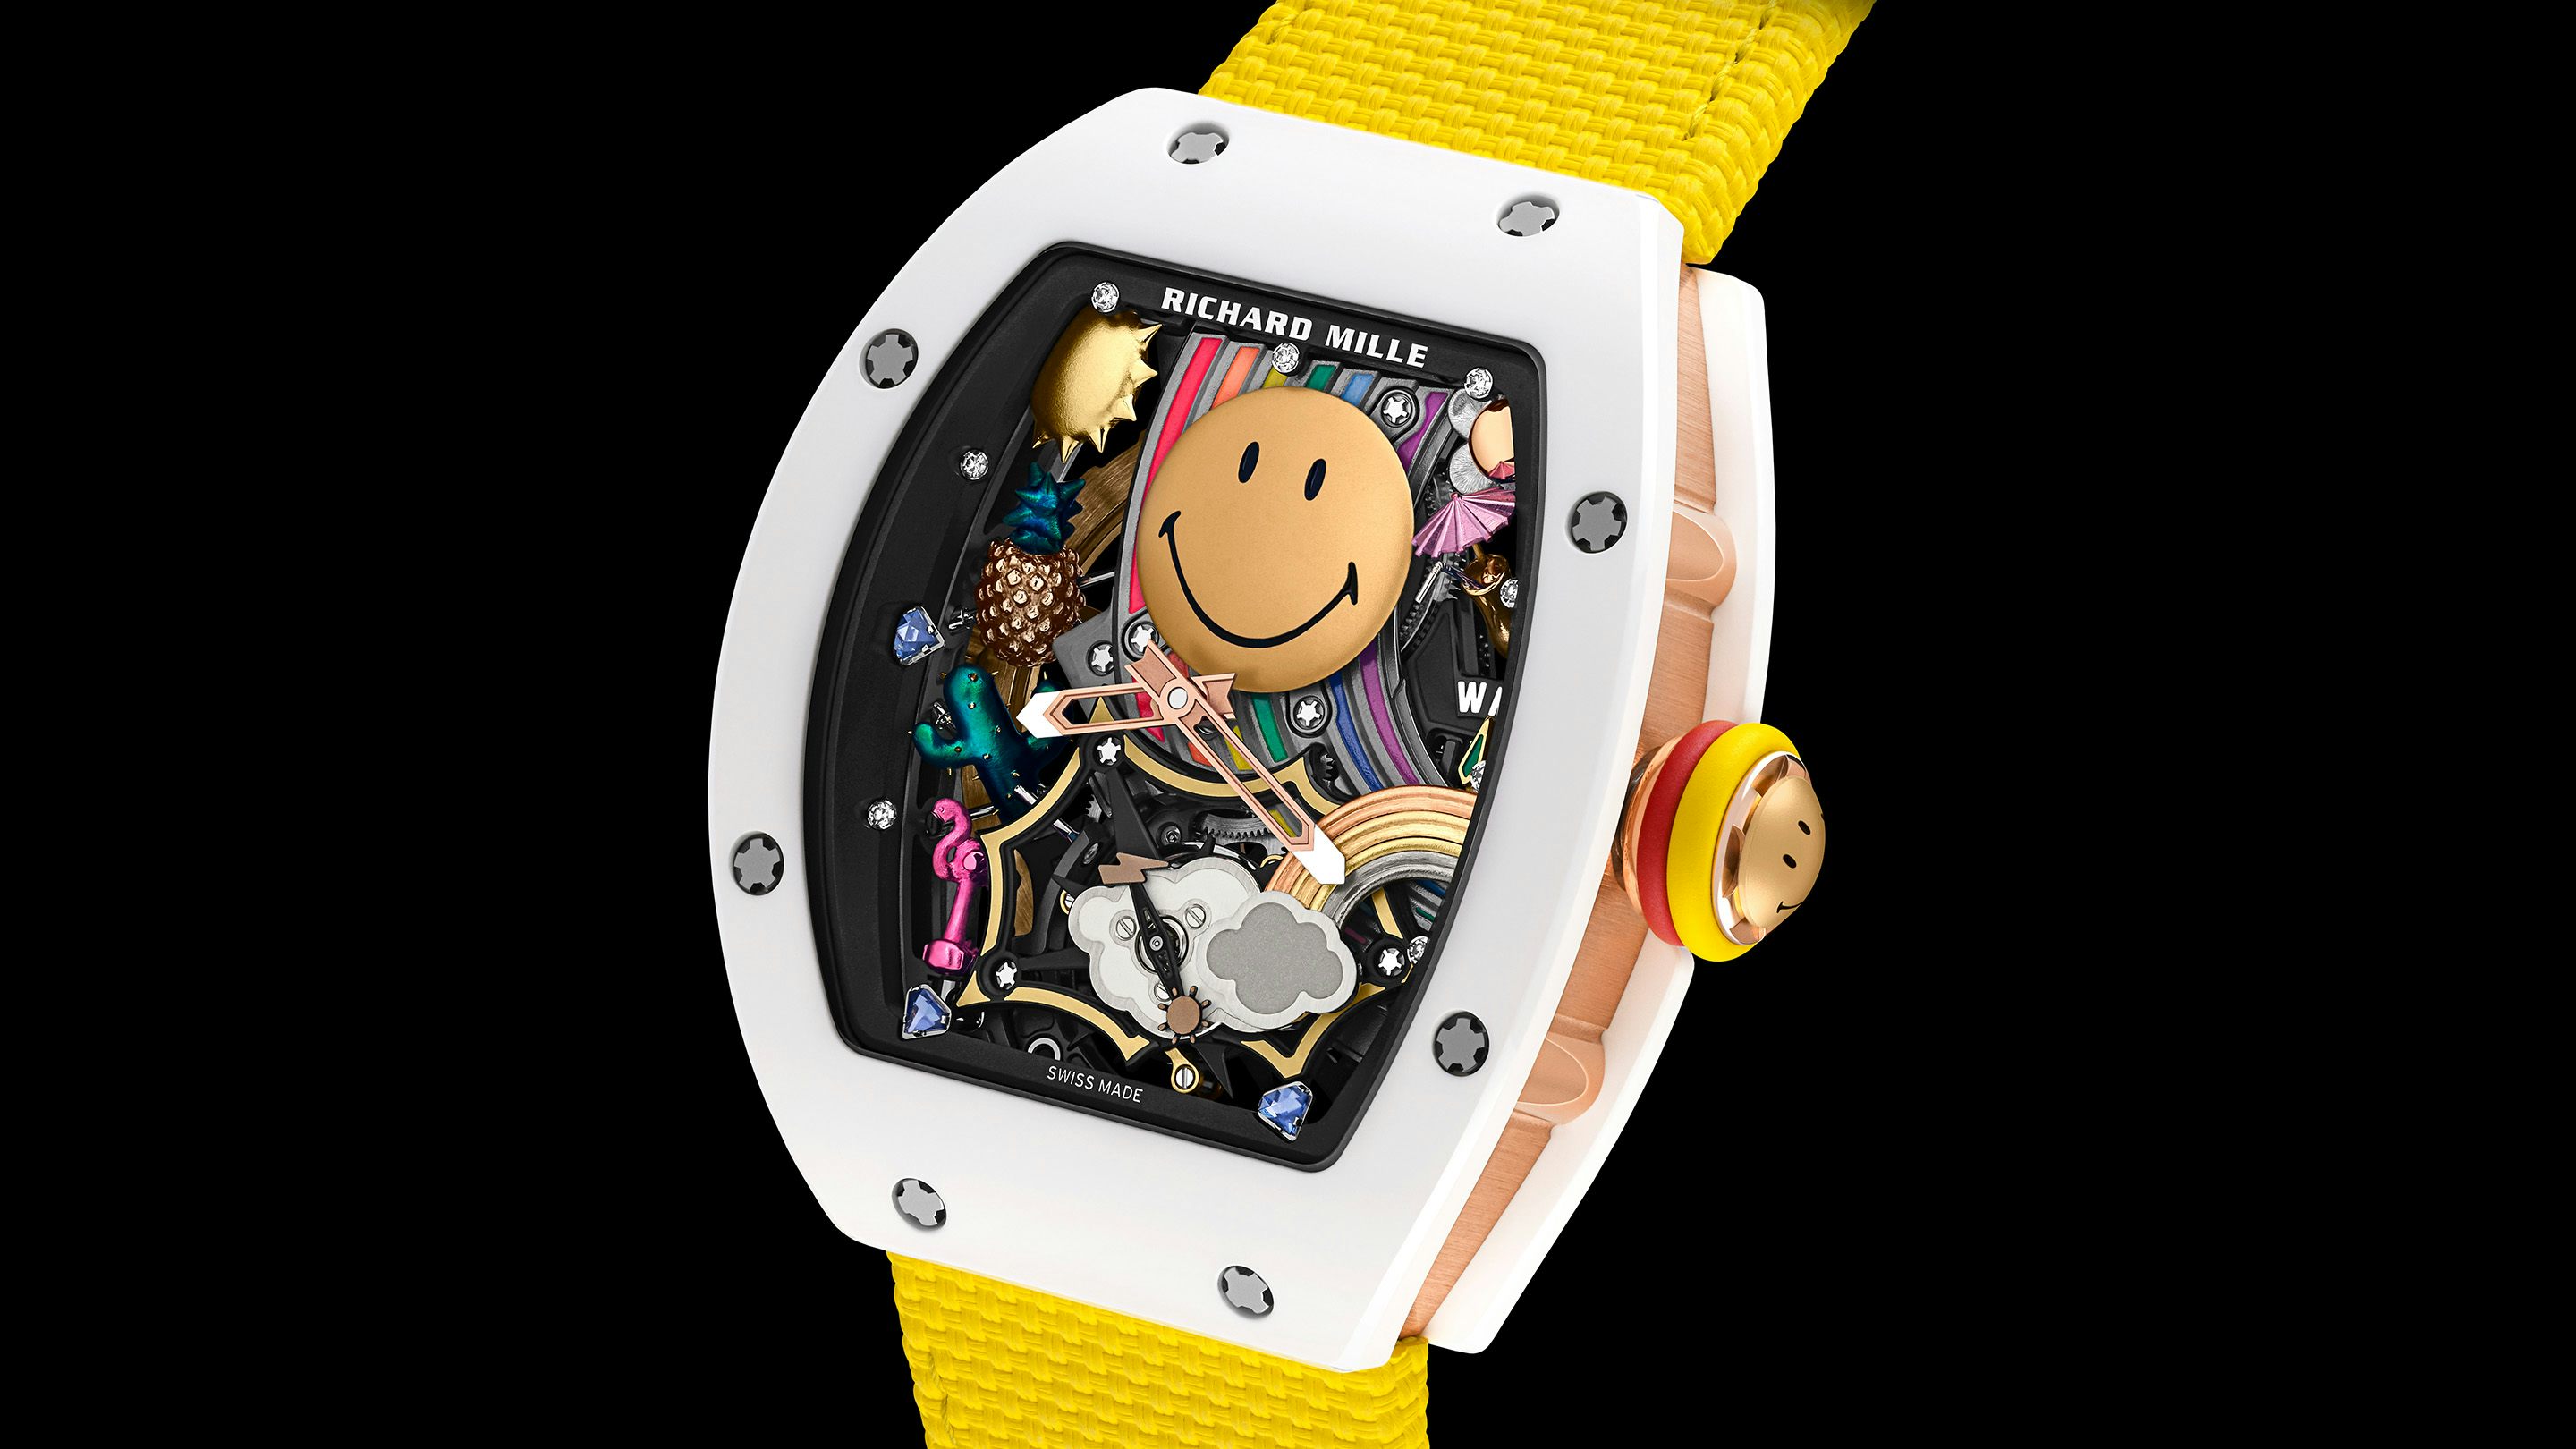 Introducing: Hold the Phone! Richard Mille Released An Emoji Watch